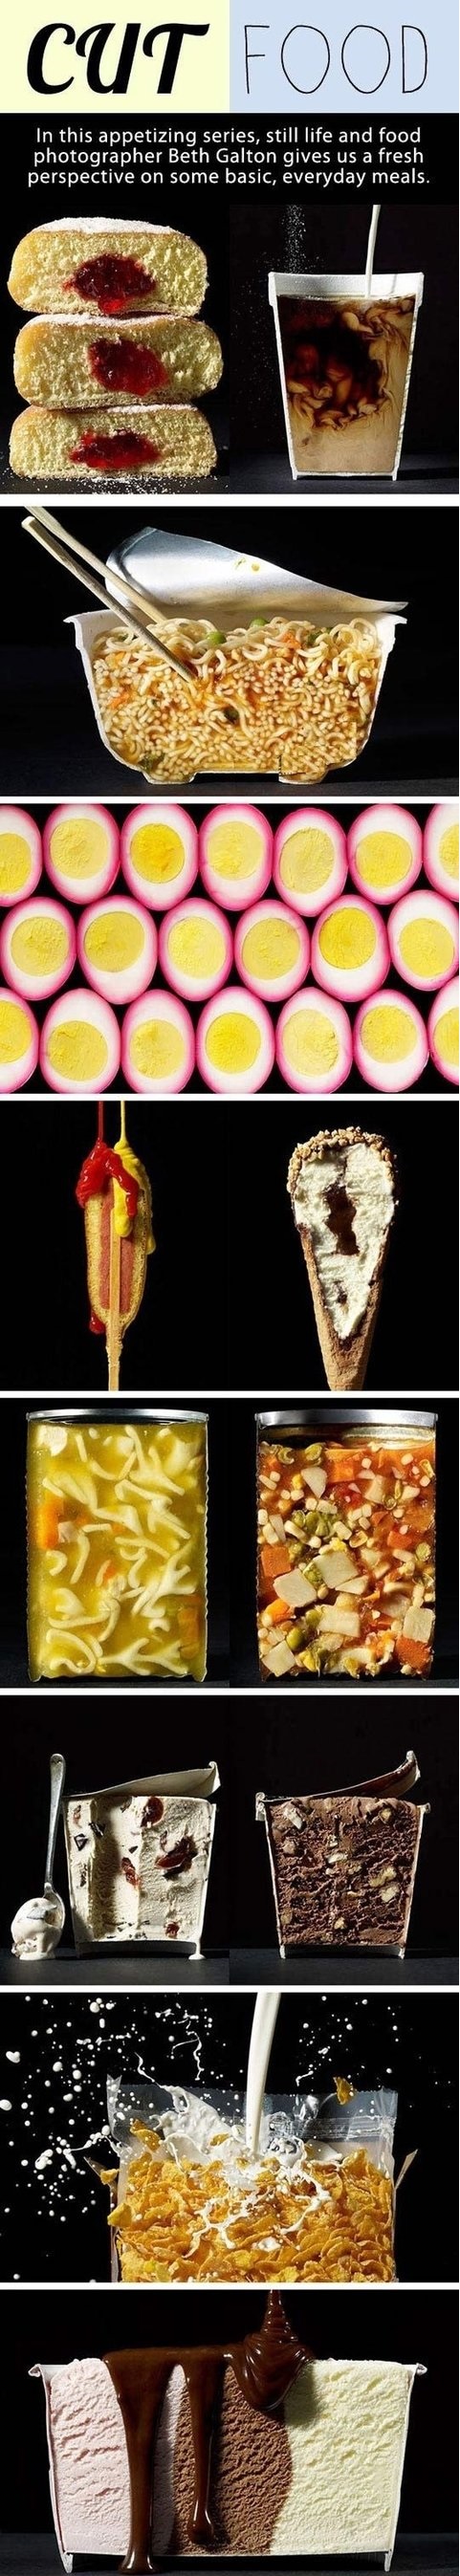 funny-pictures-cut-food-now-im-hungry